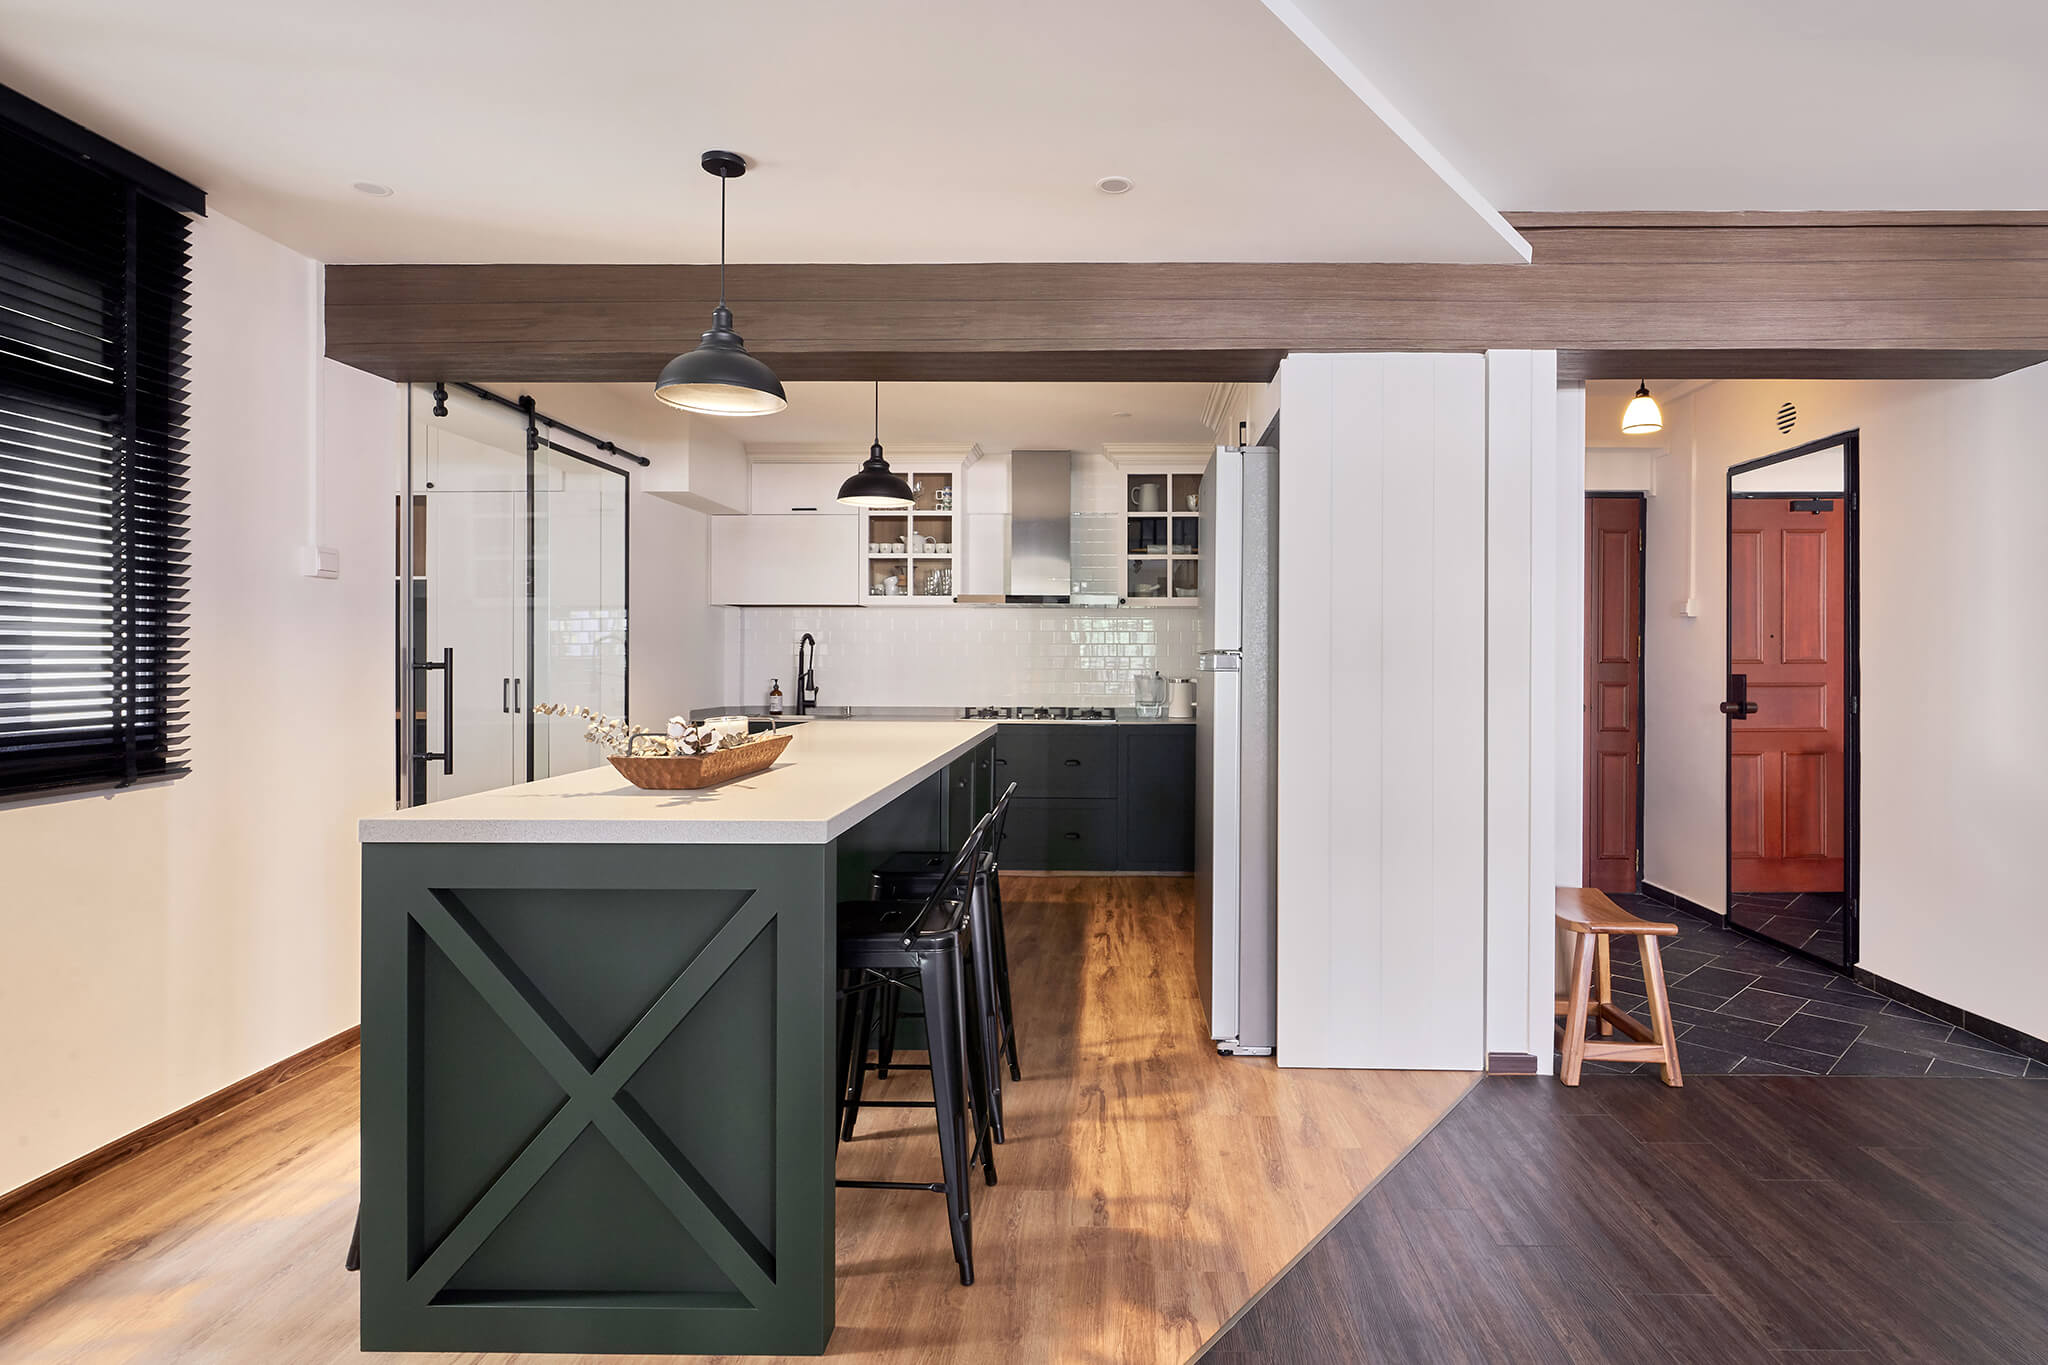 Modern open-concept kitchen with contrasting dark wood and white elements, industrial-style pendant lighting, and a green island centerpiece in a contemporary home.